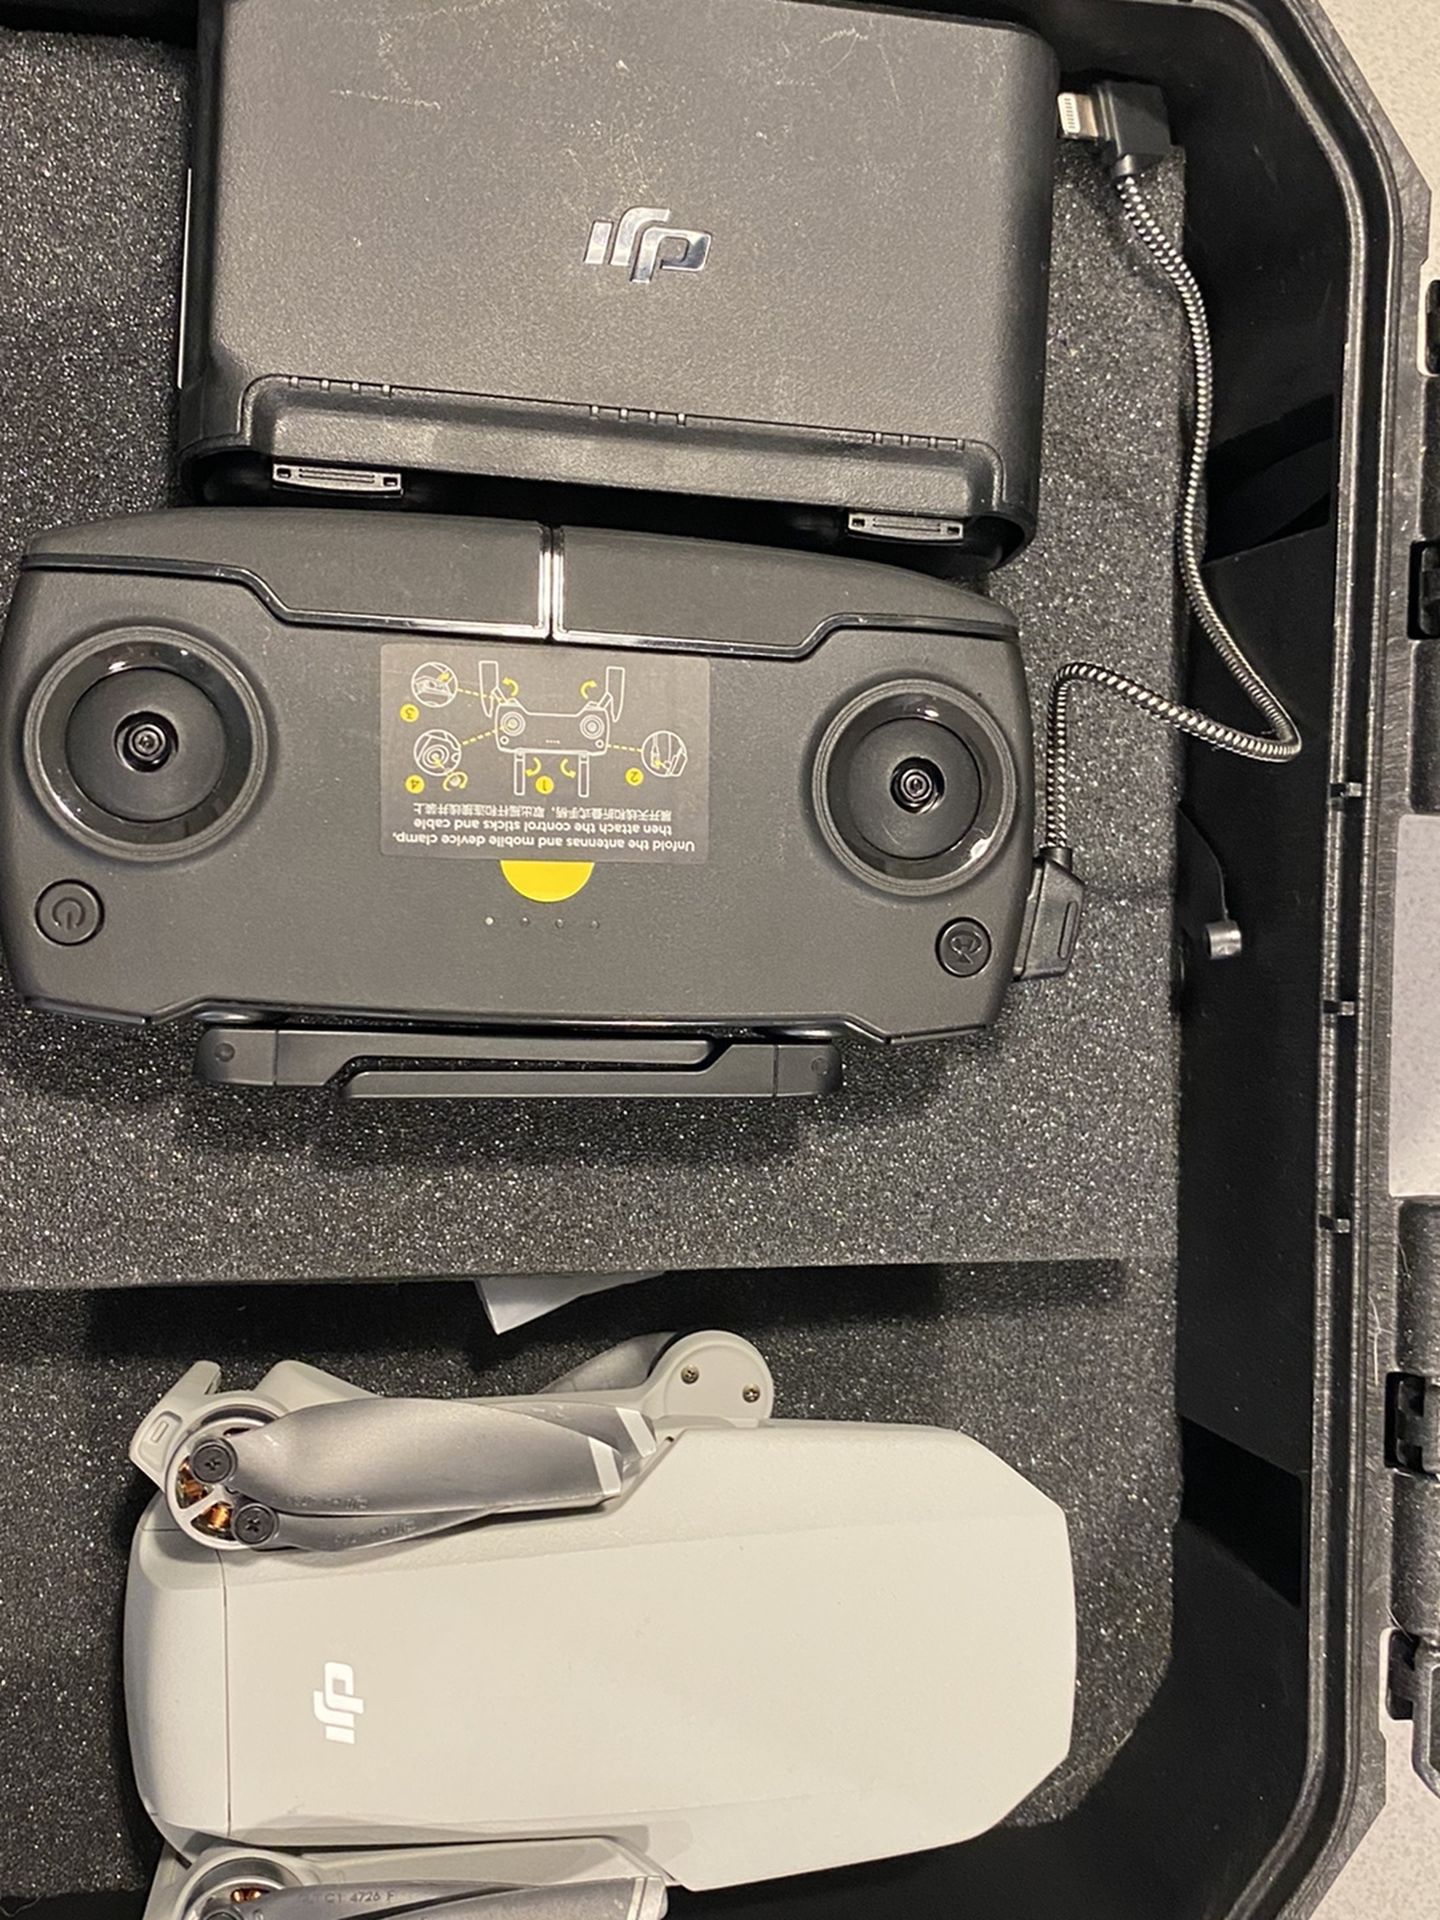 DJI - Mavic Mini - Includes Hard Case, Additional Batteries And (3) Battery Charging Dock